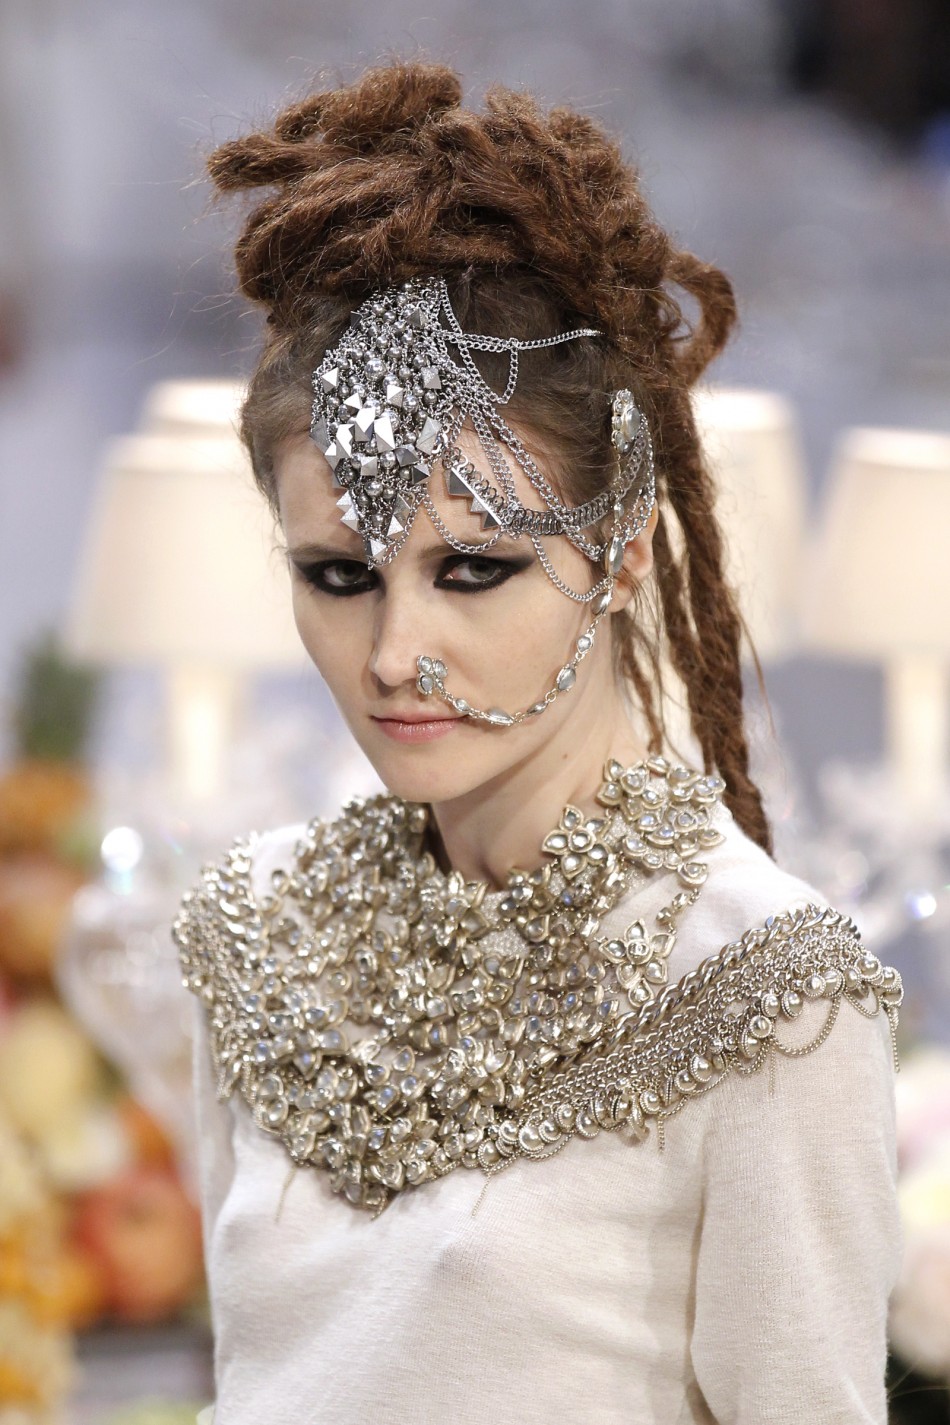 Karl Lagerfeld Hosts India-Inspired Couture Show for Chanel Fashion House